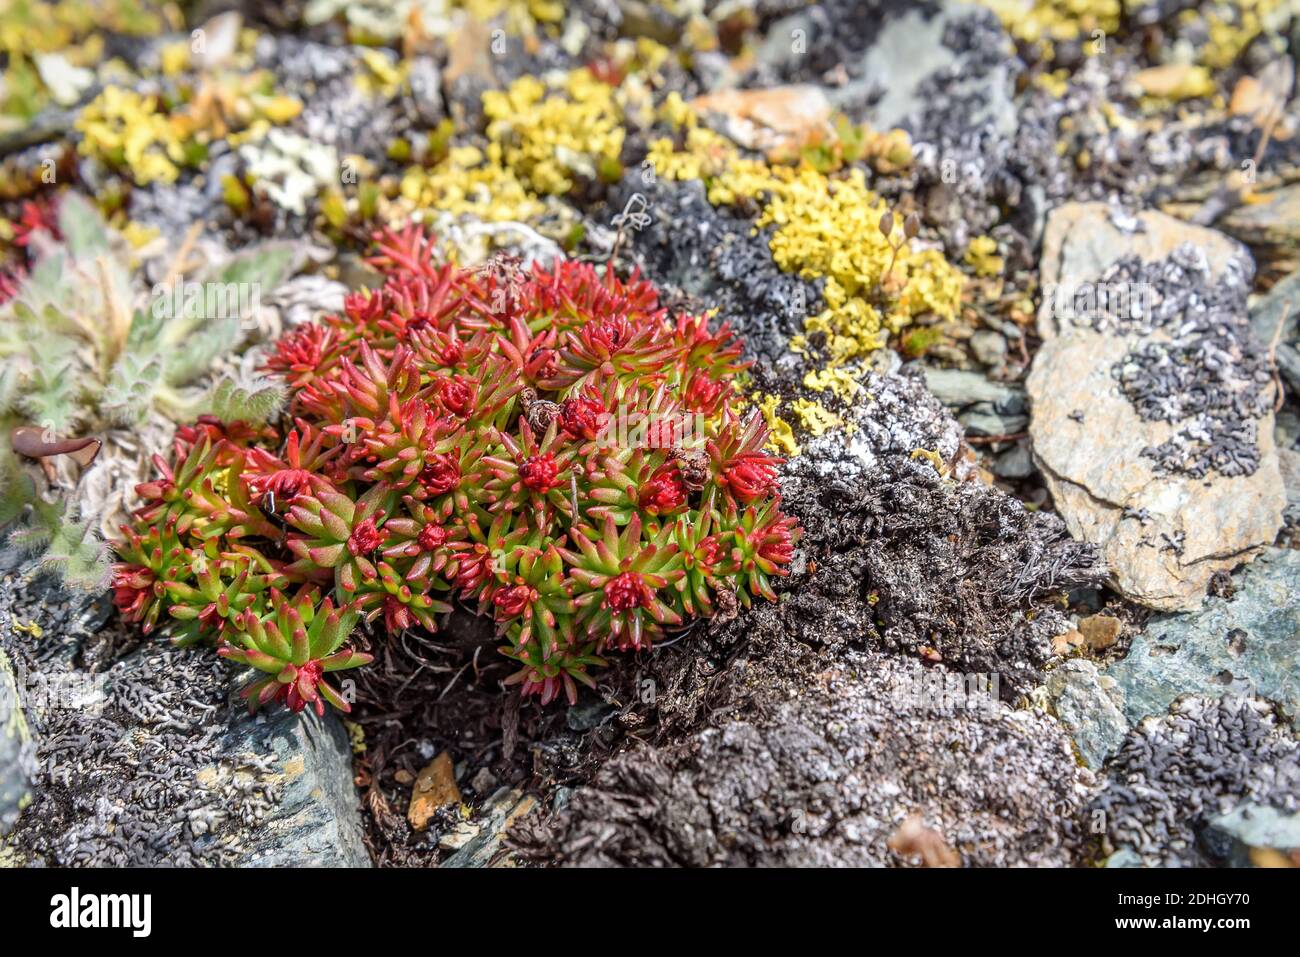 Beautiful floral background with red exotic flowers rhodiola (Rhodiola quadrifida) close-up on stones high in the mountains Stock Photo